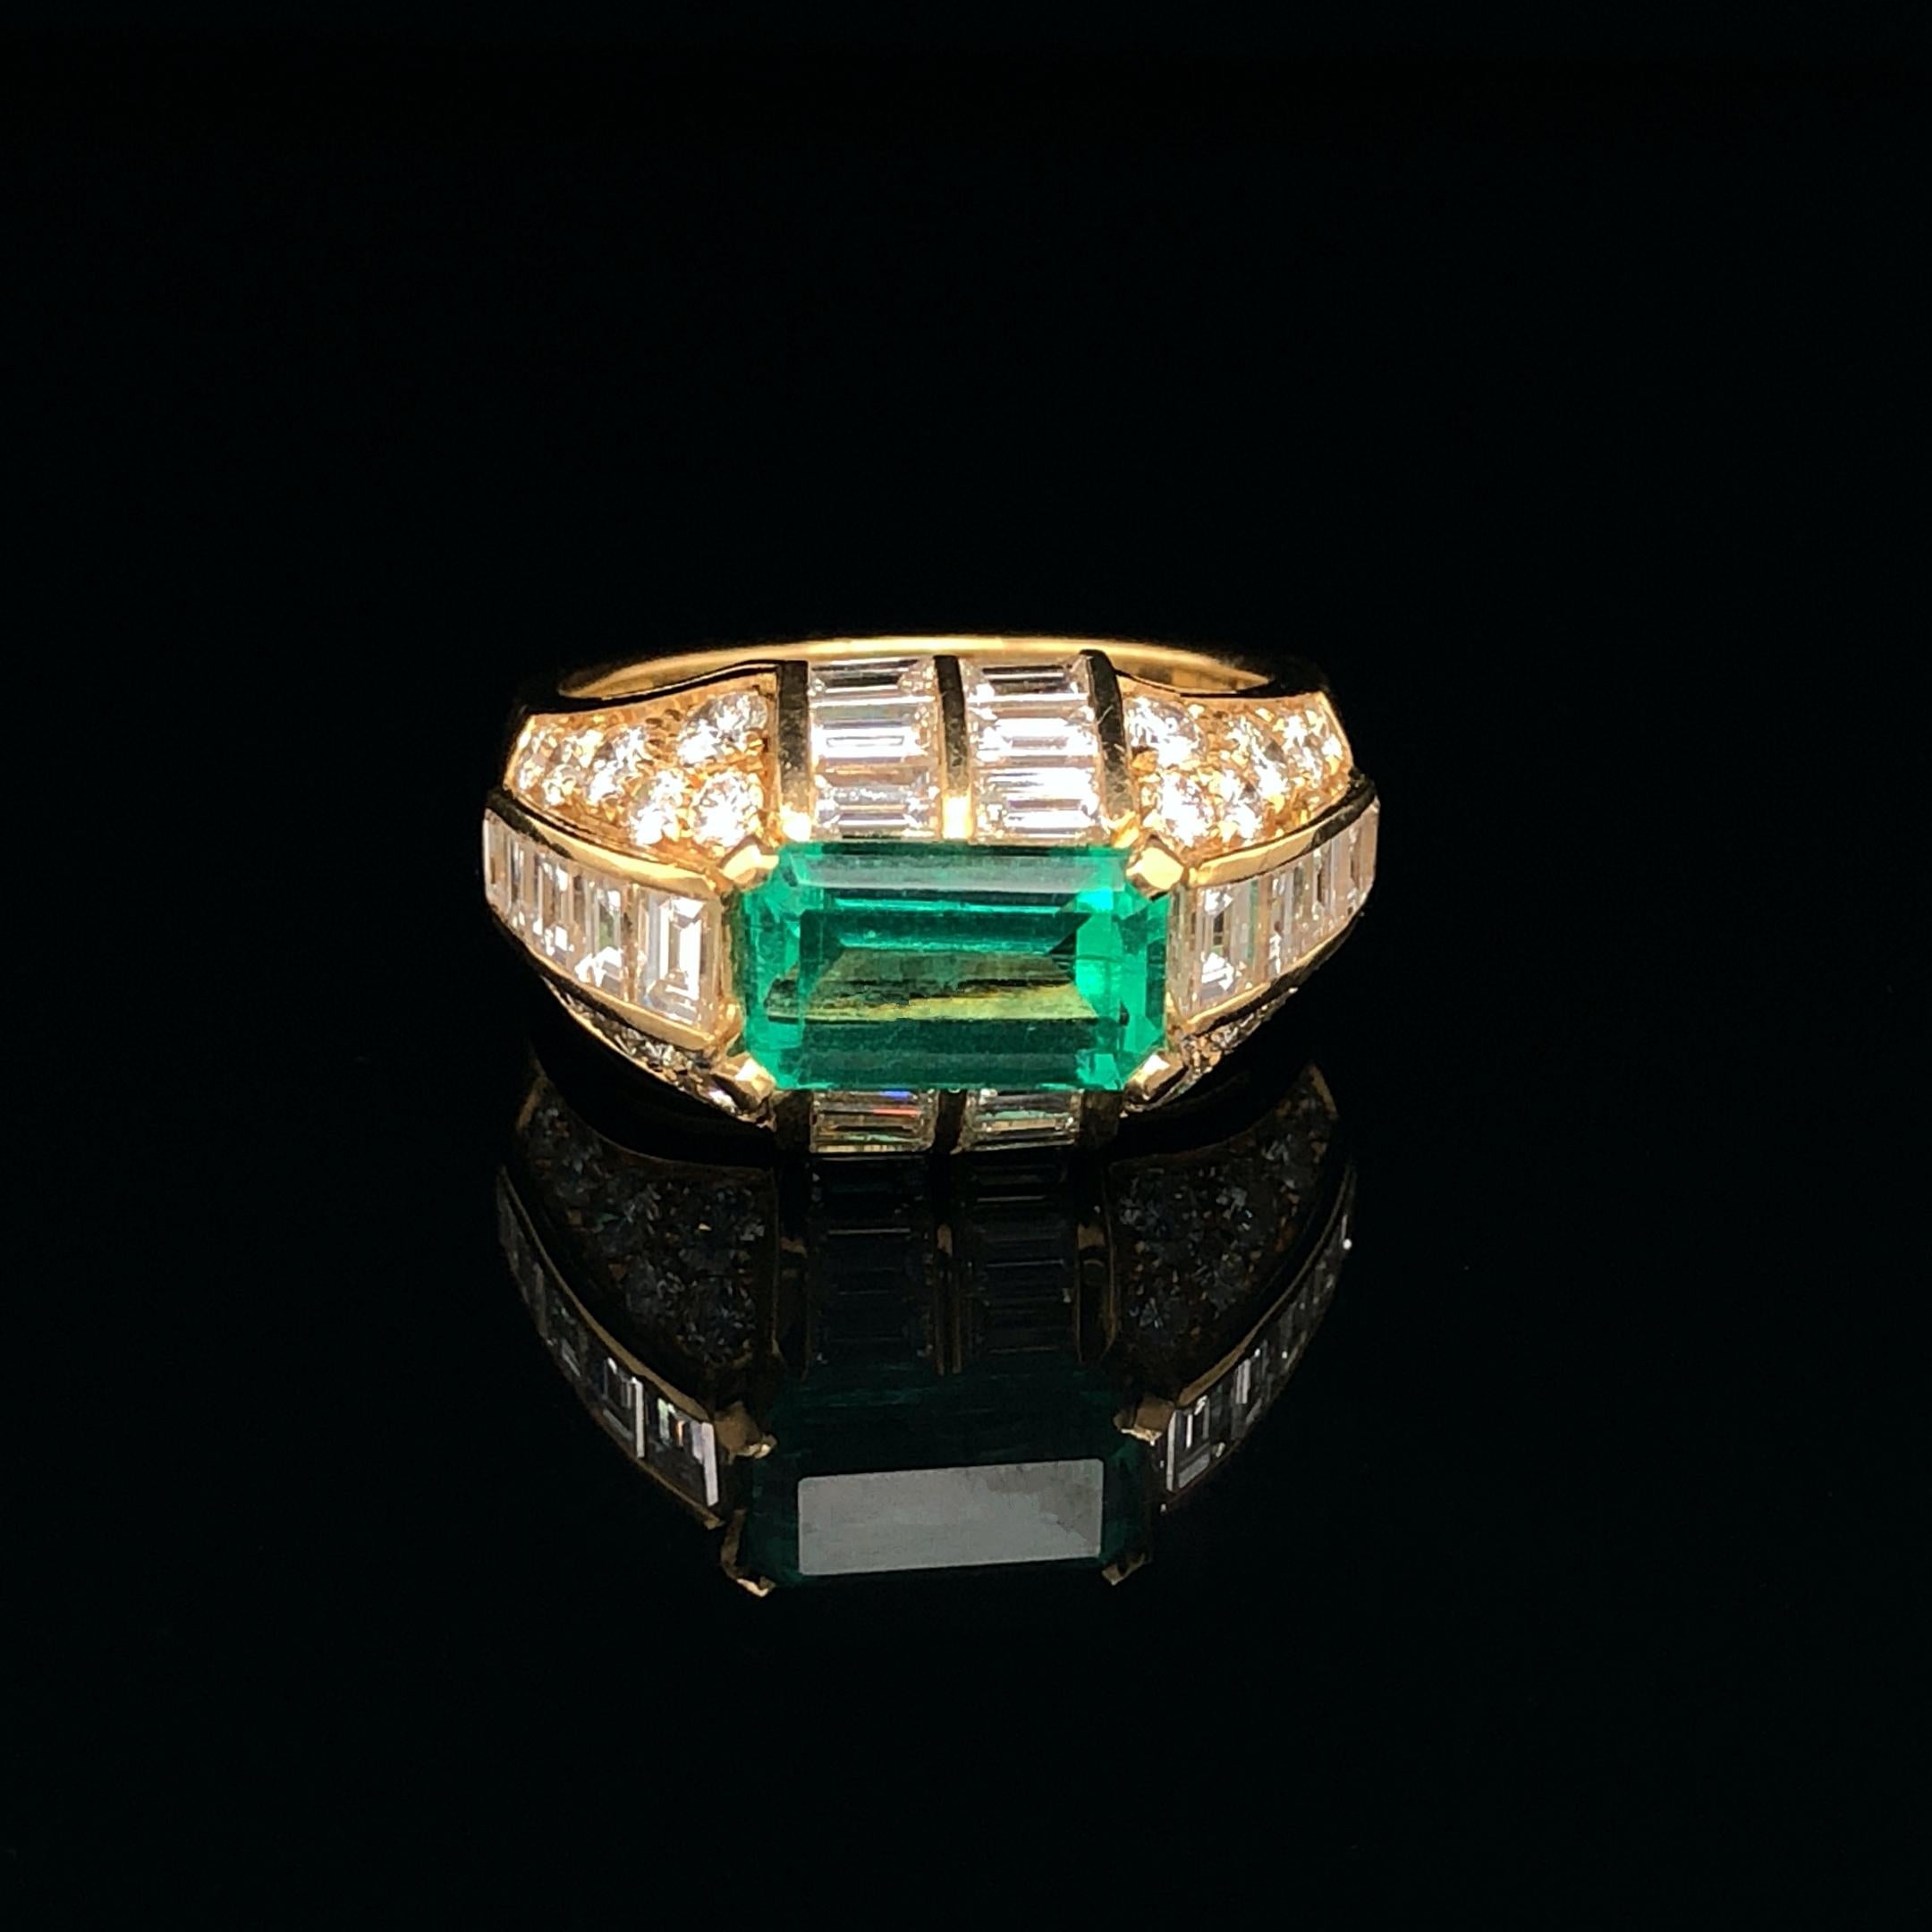 An emerald and diamond ring in yellow gold by Bulgari, ca. 1970s. The Trombino is a very popular and iconic ring model by Bulgari. The ring has a very smart and luxurious design, emphasising the centre gemstone, with the diamonds set in a manner